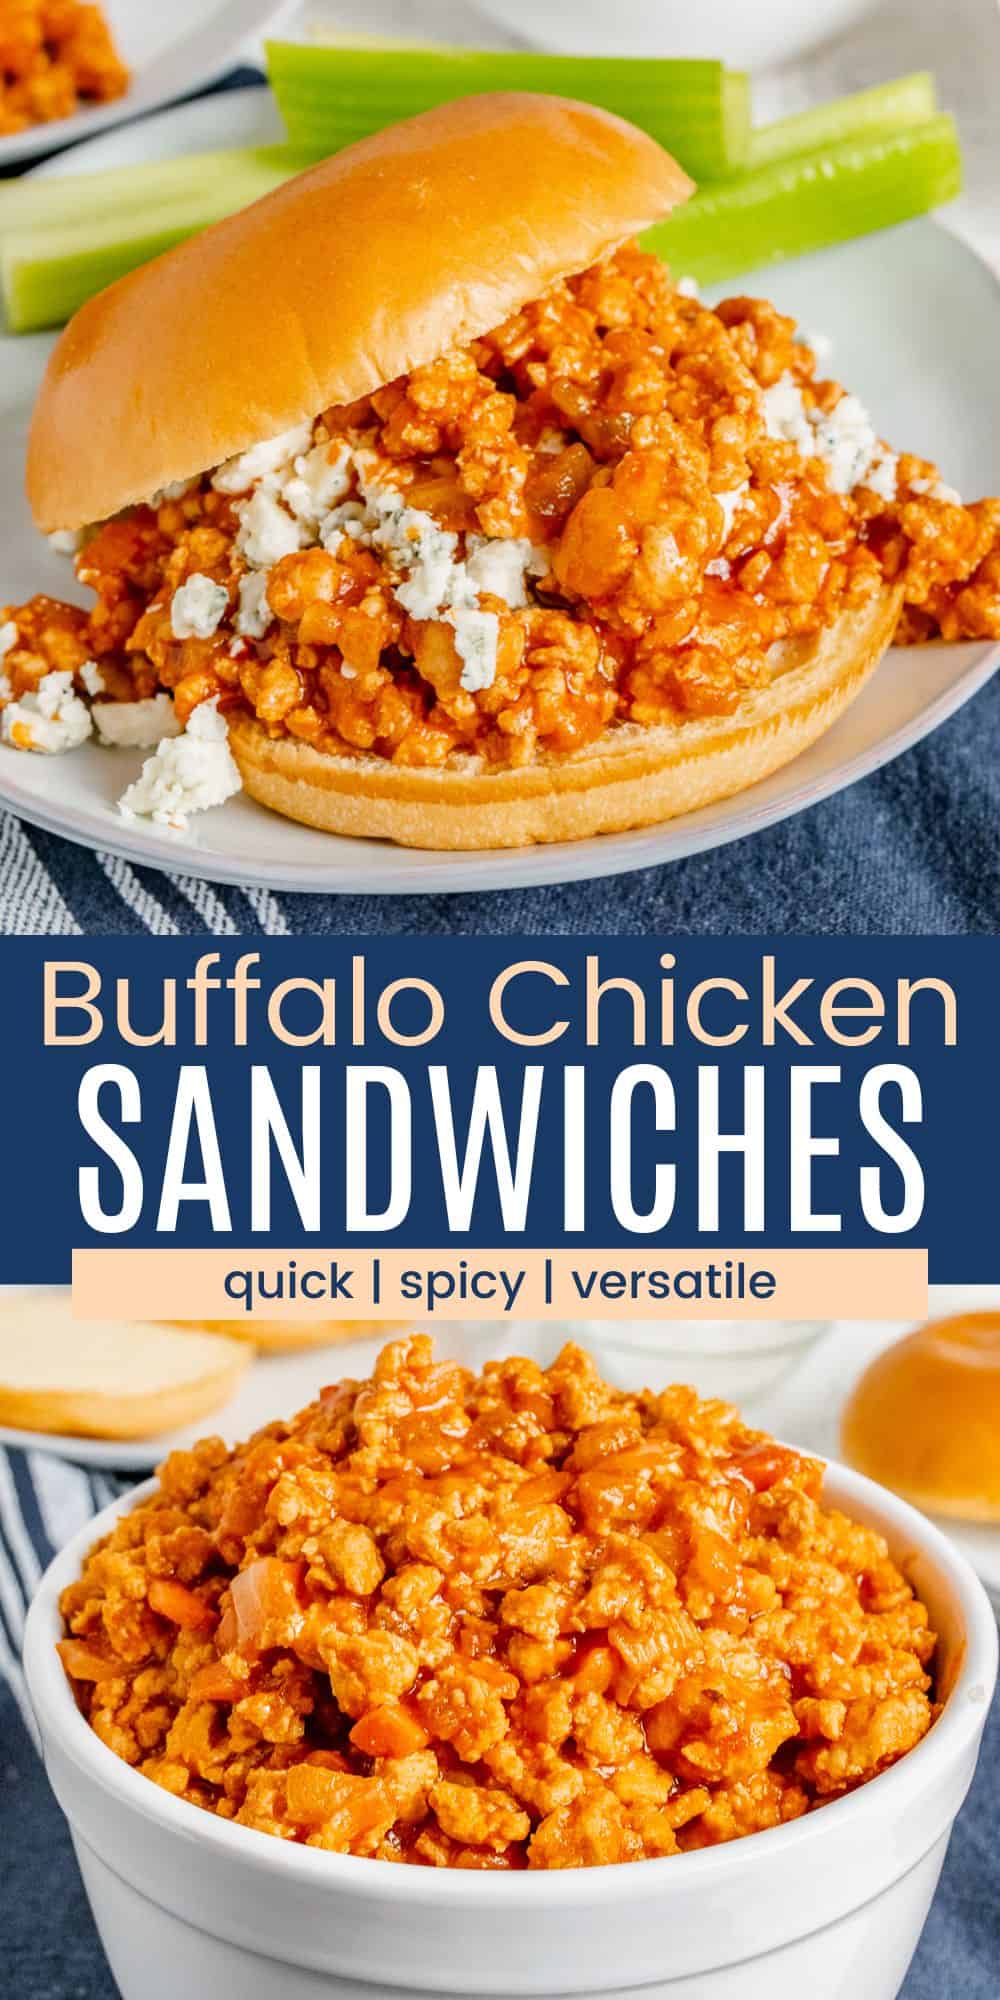 Buffalo Chicken Sandwiches | Cupcakes & Kale Chips